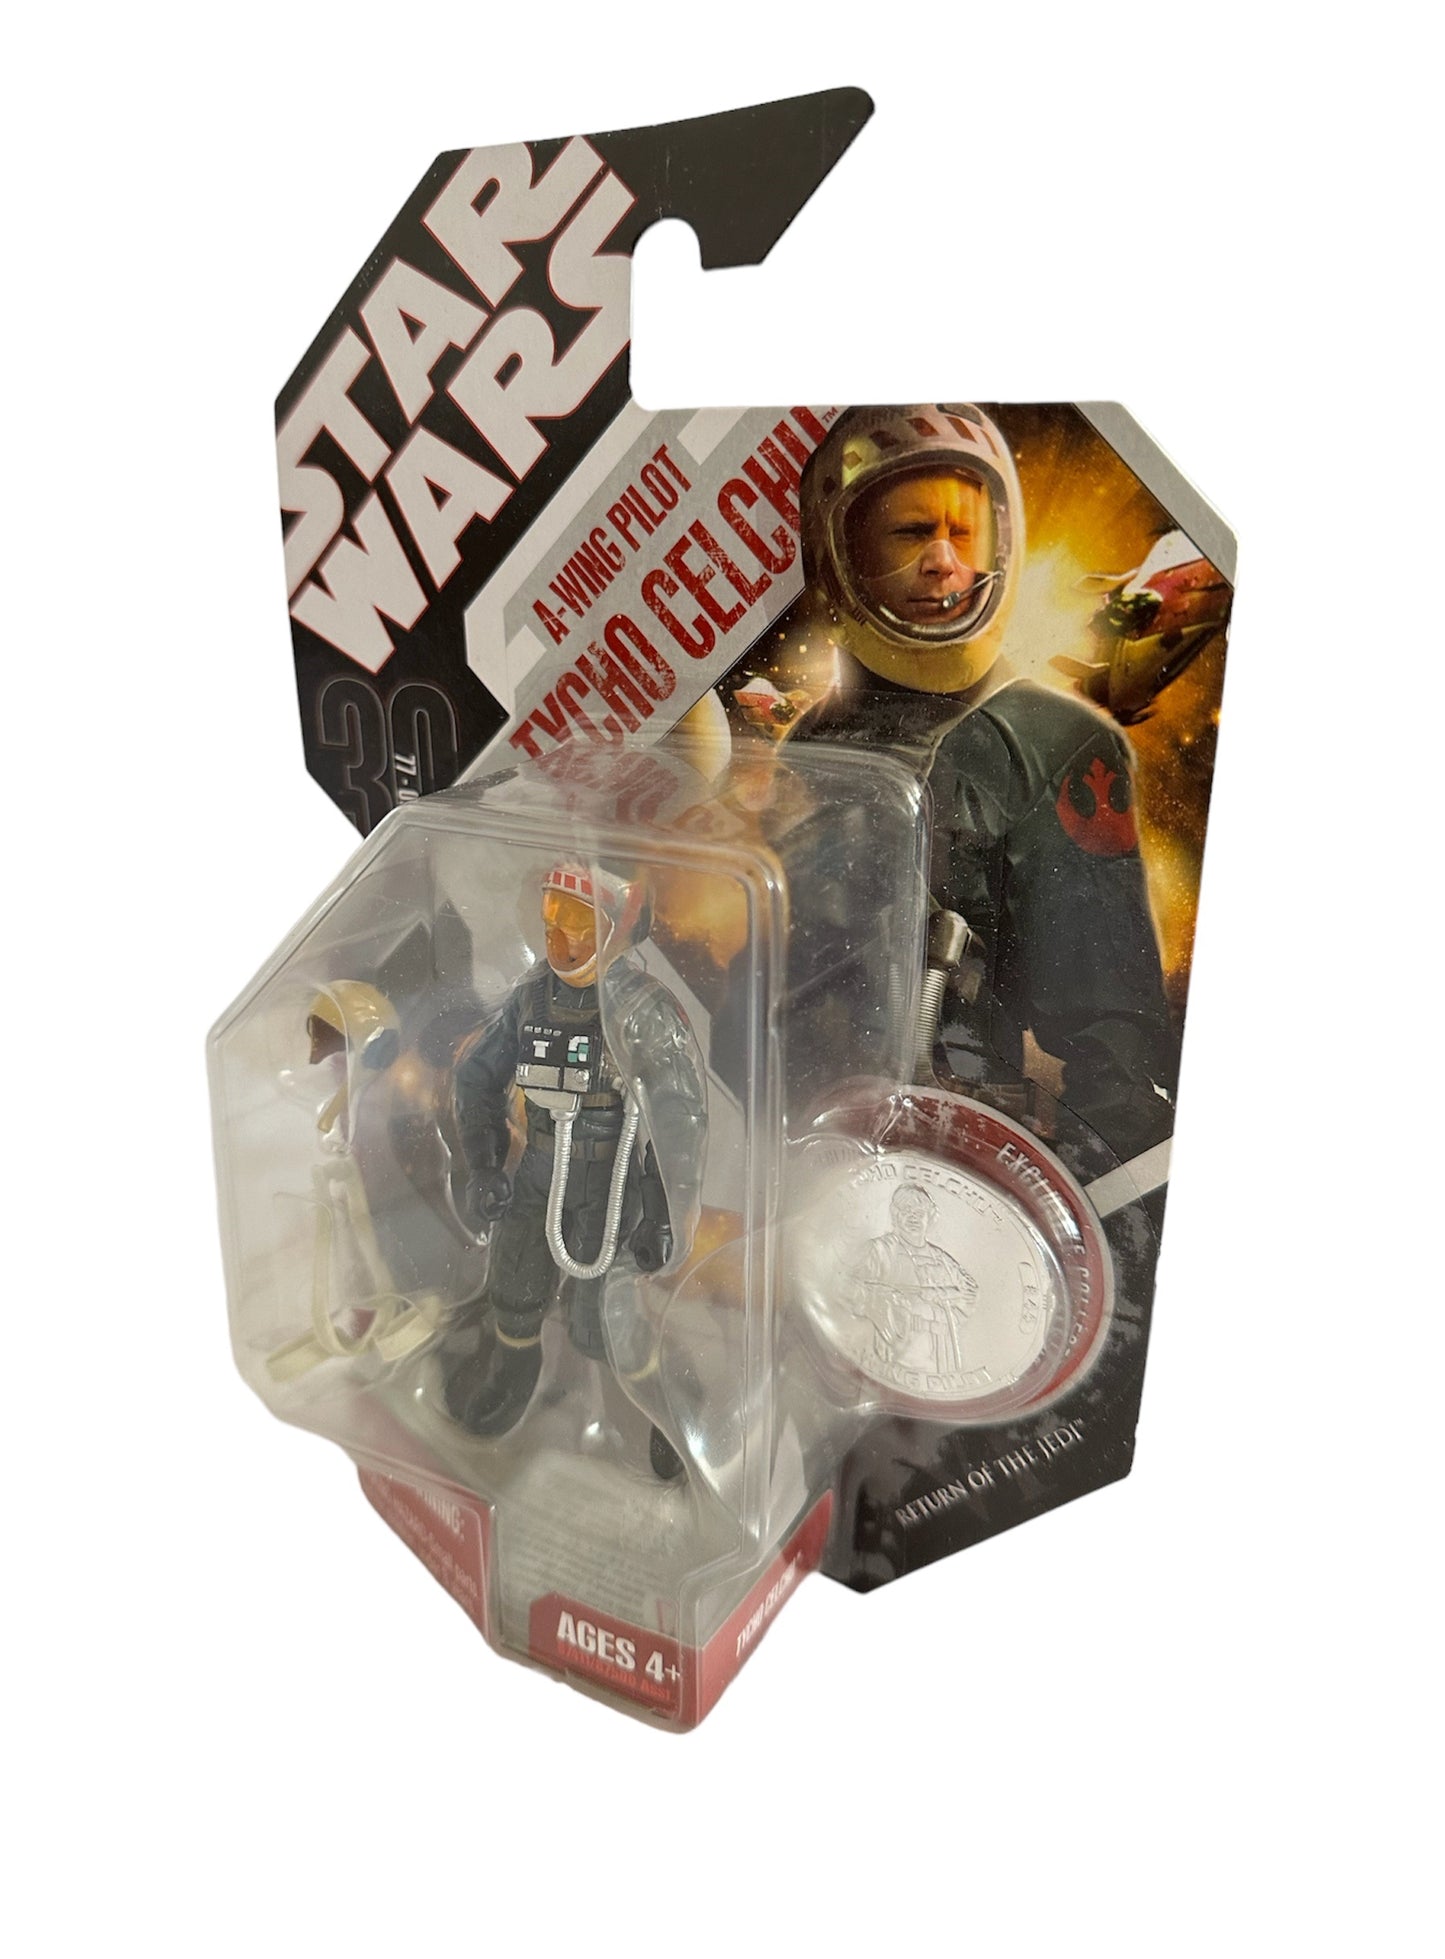 Vintage 2007 Star Wars 30th Anniversary Collection A-Wing Pilot Tycho Celchu Action Figure With Exclusive Collectors Coin No. 44 - Brand New Factory Sealed Shop Stock Room Find